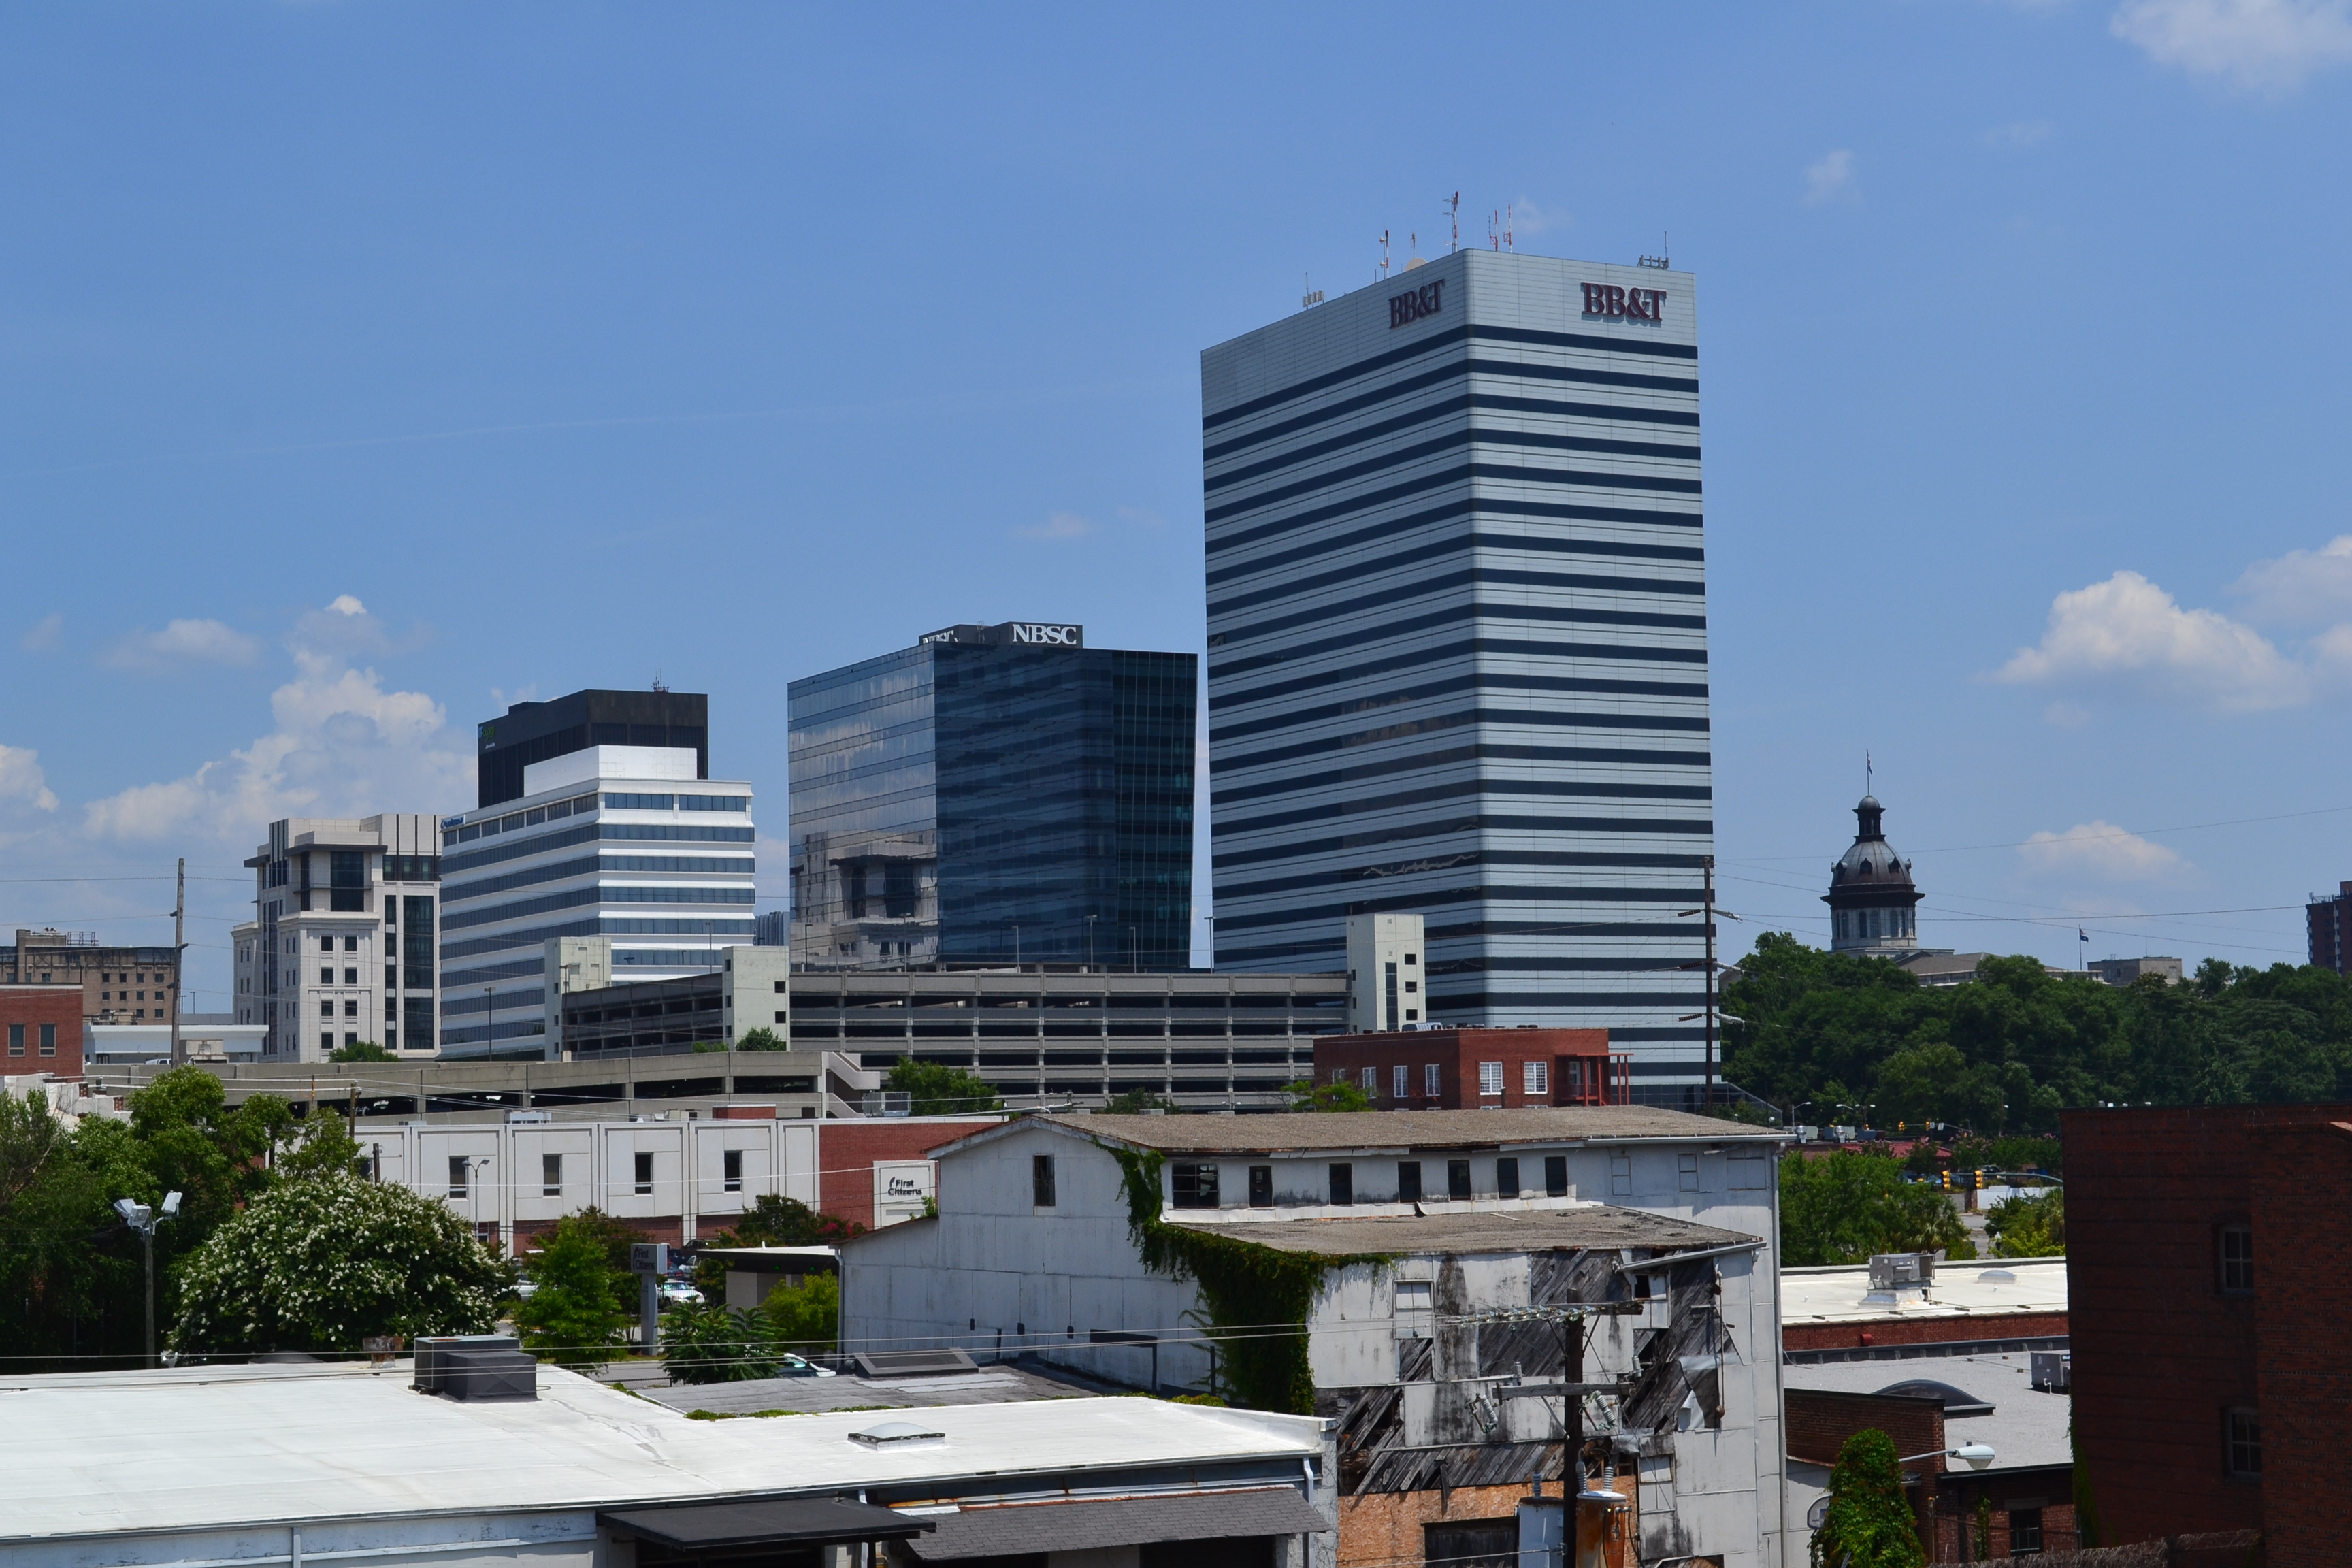 Downtown Columbia SC Hotspots | The Vista, Five Points and Midtown